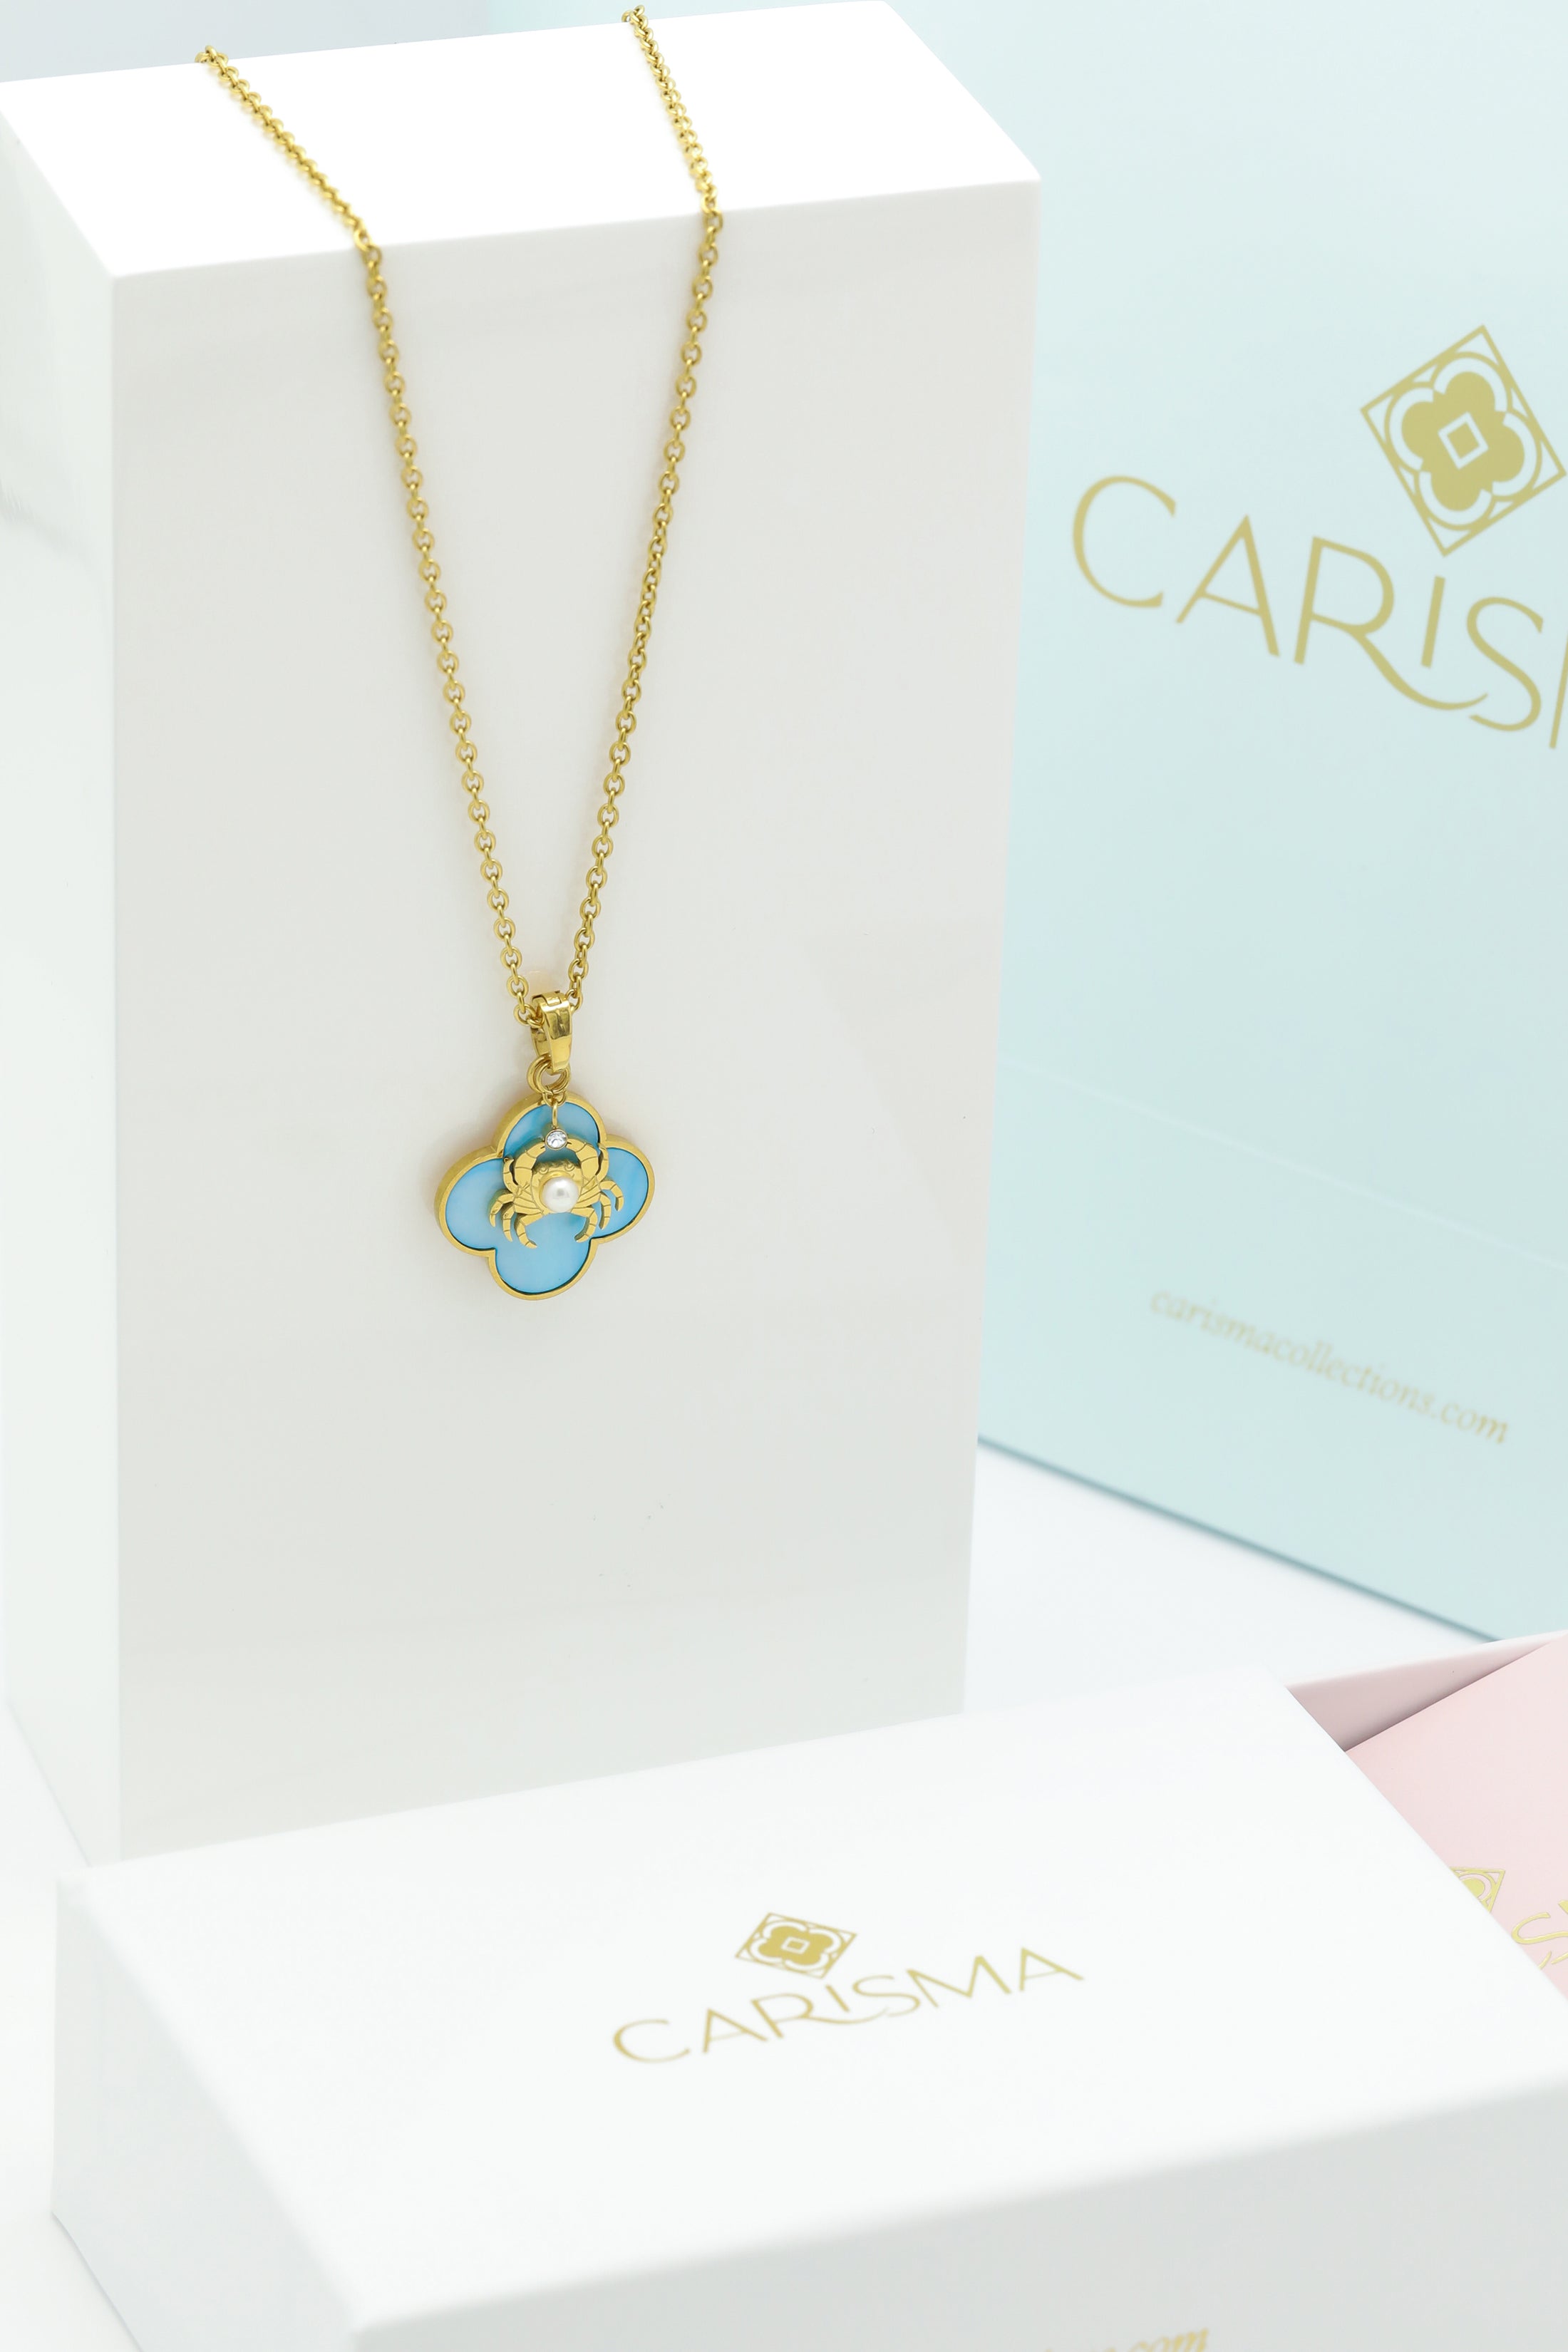 Qabru Resilience FreshWater Pearl Pendant &amp; Blue Mother of Pearl Pendant Necklace Gift Set